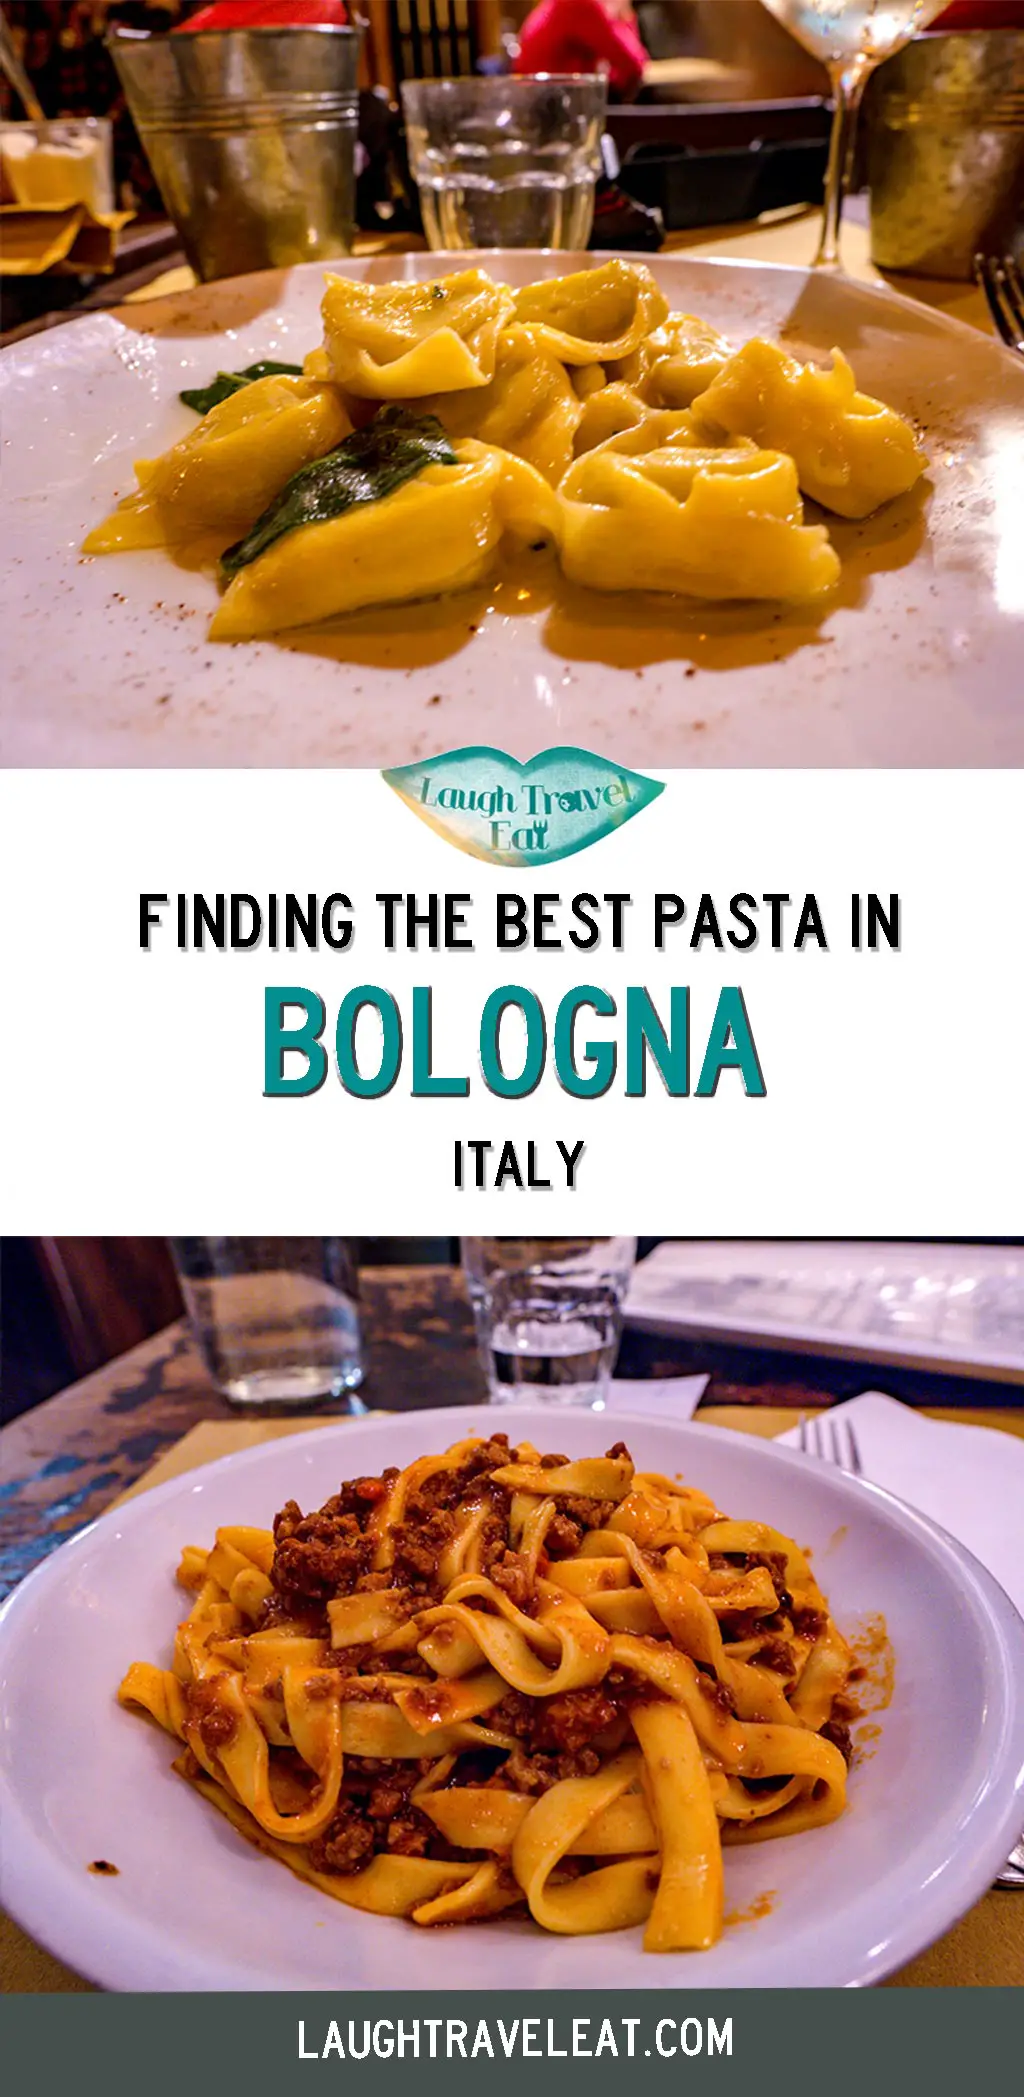 Bologna is the food capital of Italy, a city known for it red roofs, pasta, and gelato. If you think you know Italian food, think again, because it wasn’t until I set foot in Bologna that I truly experience authentic Italian food not adapted for tourists. Before I give you any food recommendation, here are a few food facts you need to know about Bologna: #Bologna #Italy #food